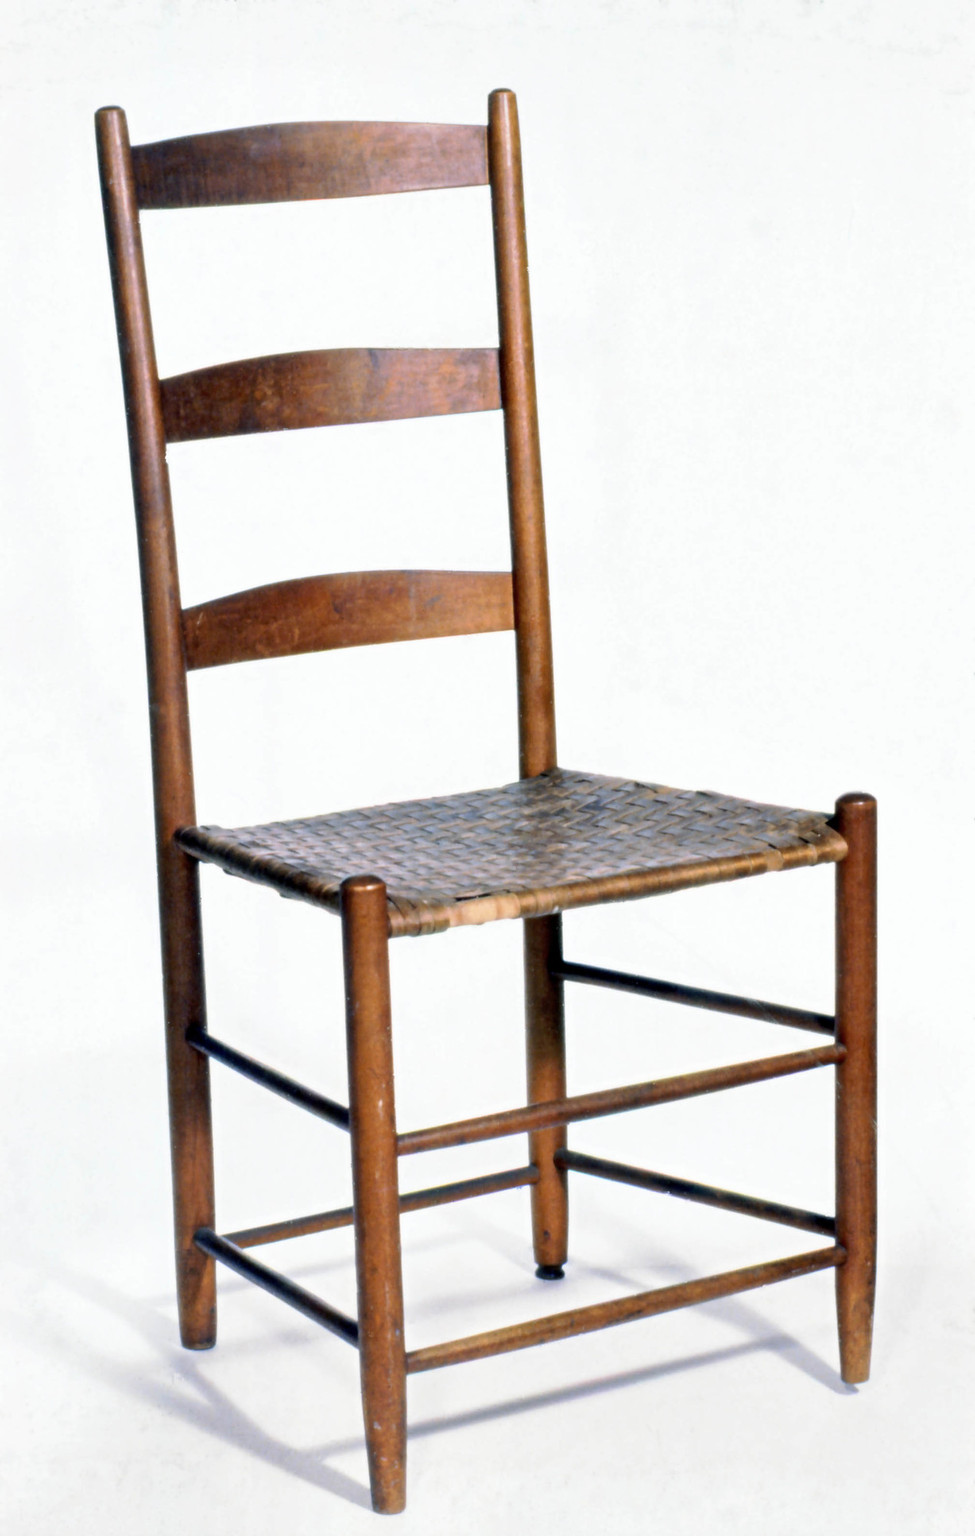 Chair created by the shakers in a medium wood